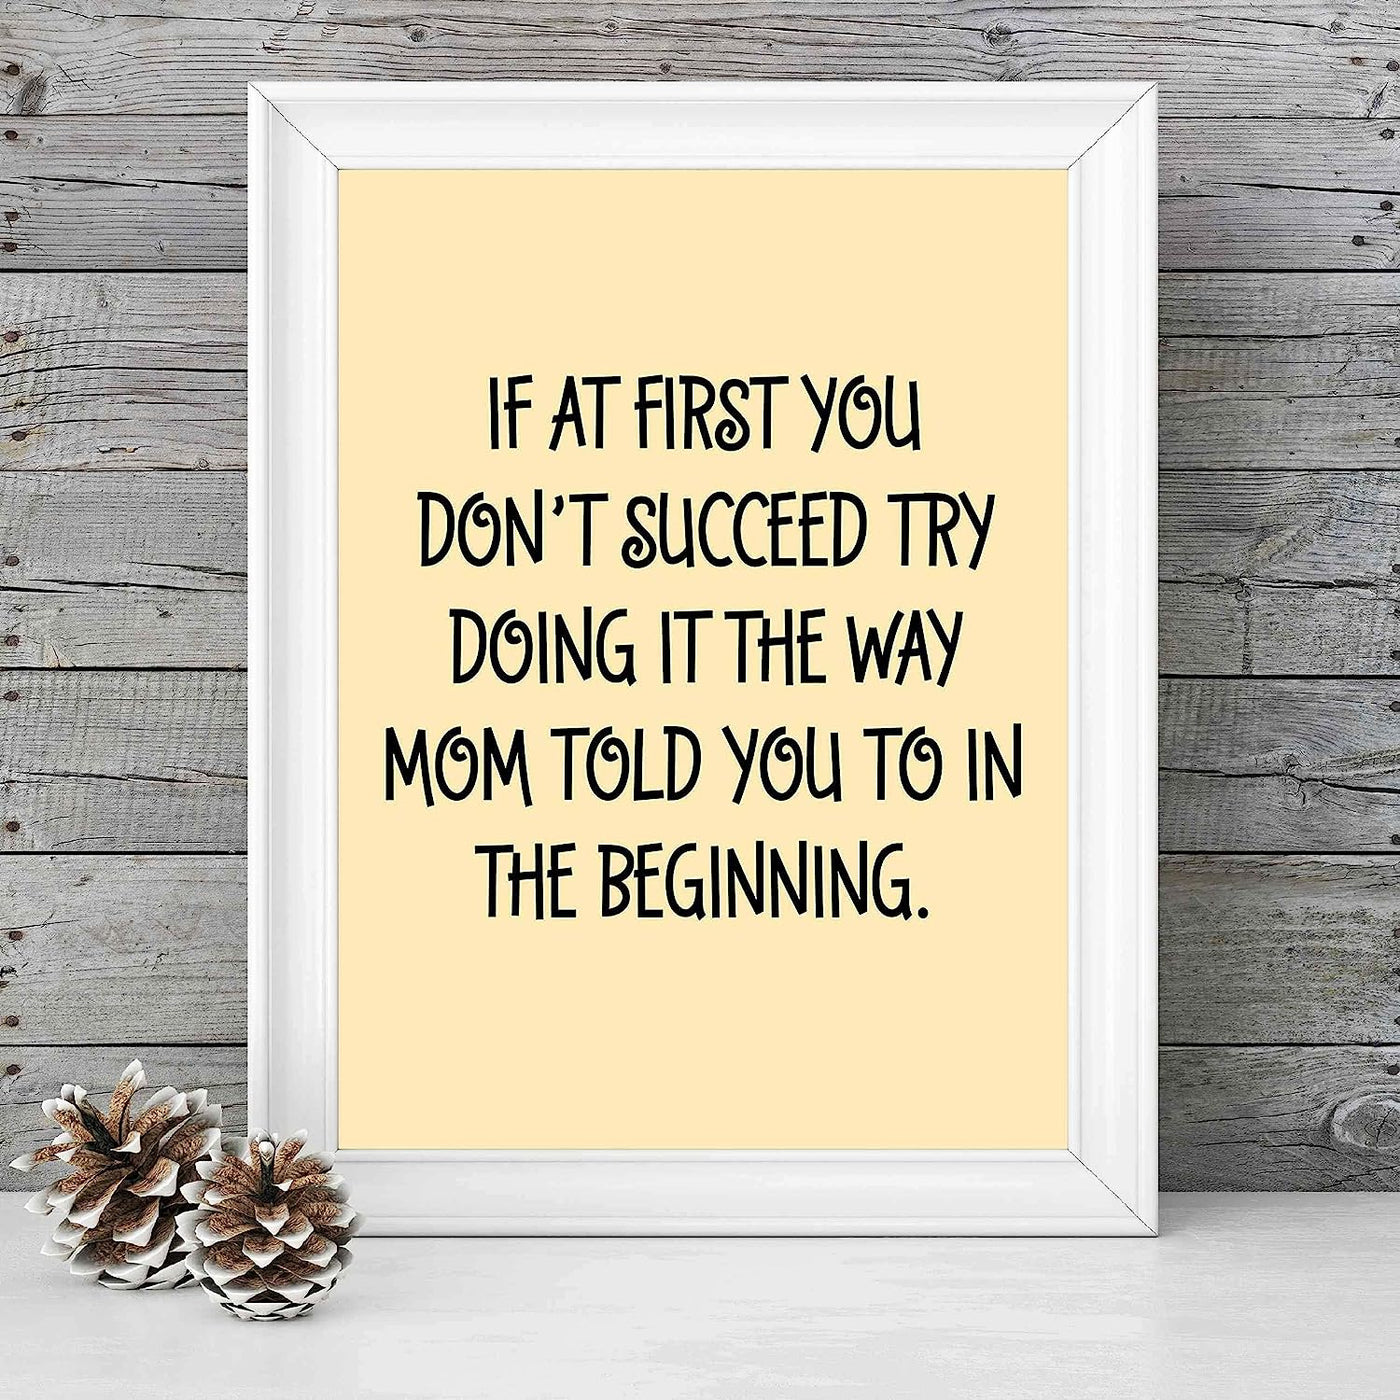 If At First Don't Succeed-Try Doing Way Mom Told You Funny Family Wall Sign -8 x 10" Typographic Art Print-Ready to Frame. Humorous Home-Bar-Shop-Cave-Novelty Decor. Fun Decoration for All!